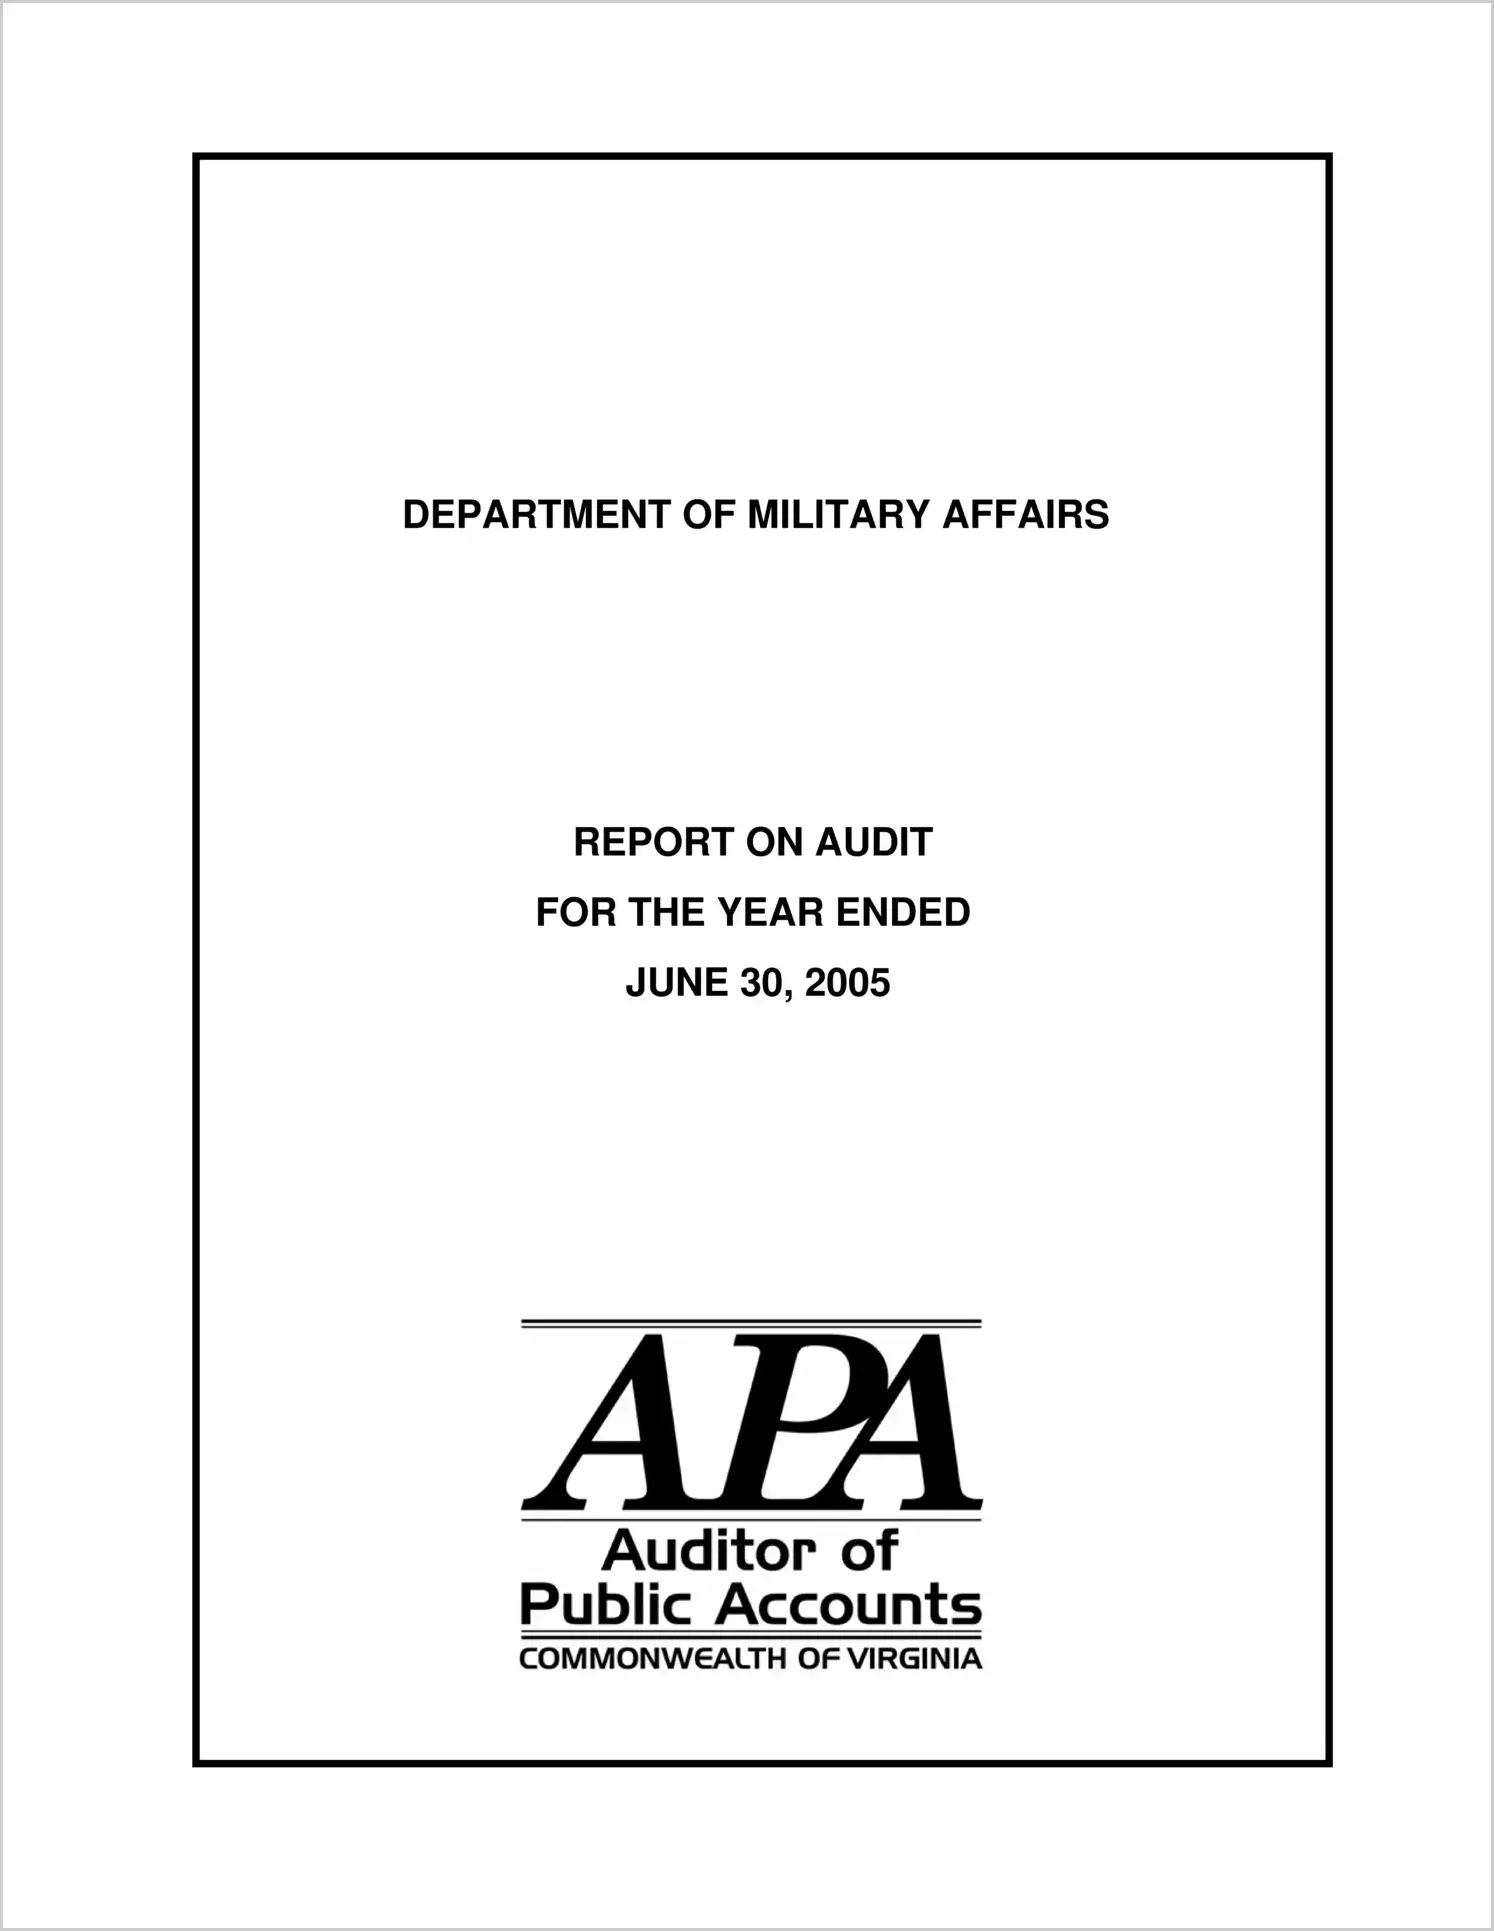 Department of Military Affairs for the period ended June 30, 2005